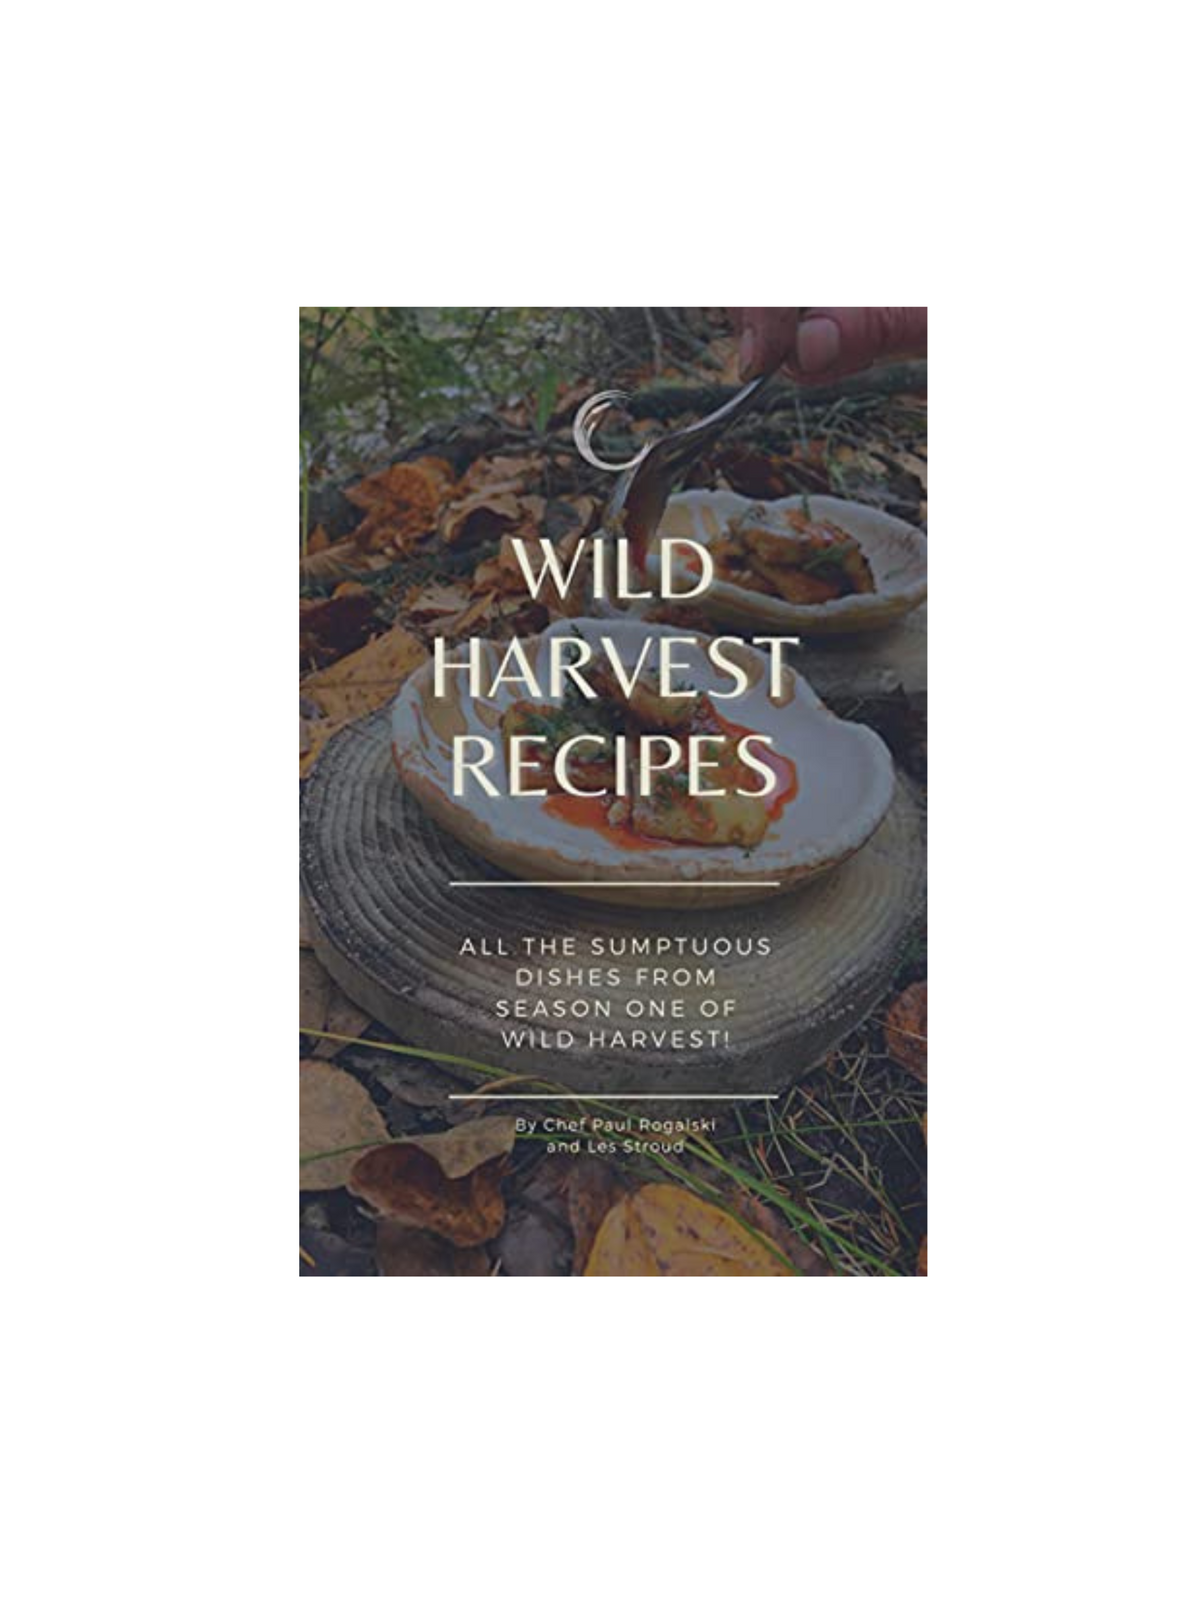 Wild Harvest Recipes Book: All the sumptuous dishes from Season One of Wild Harvest